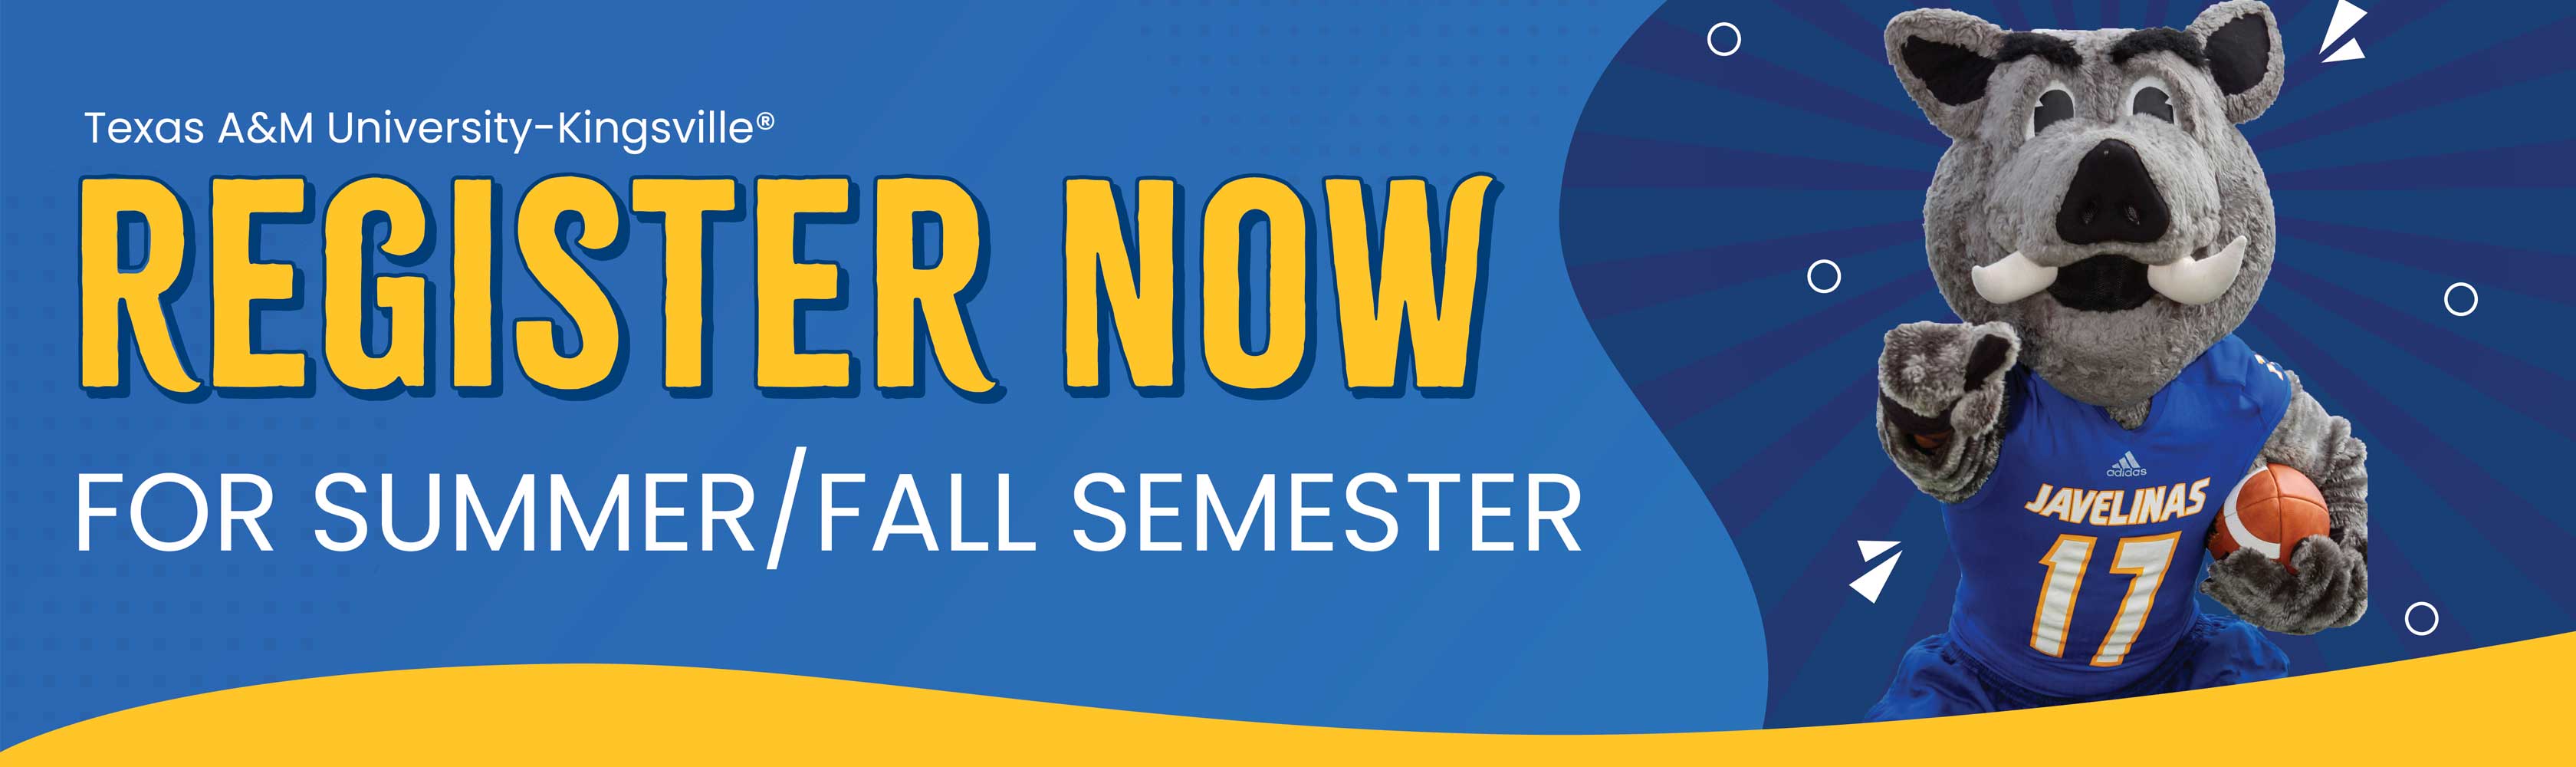 Registration Open for Summer and Fall Semesters